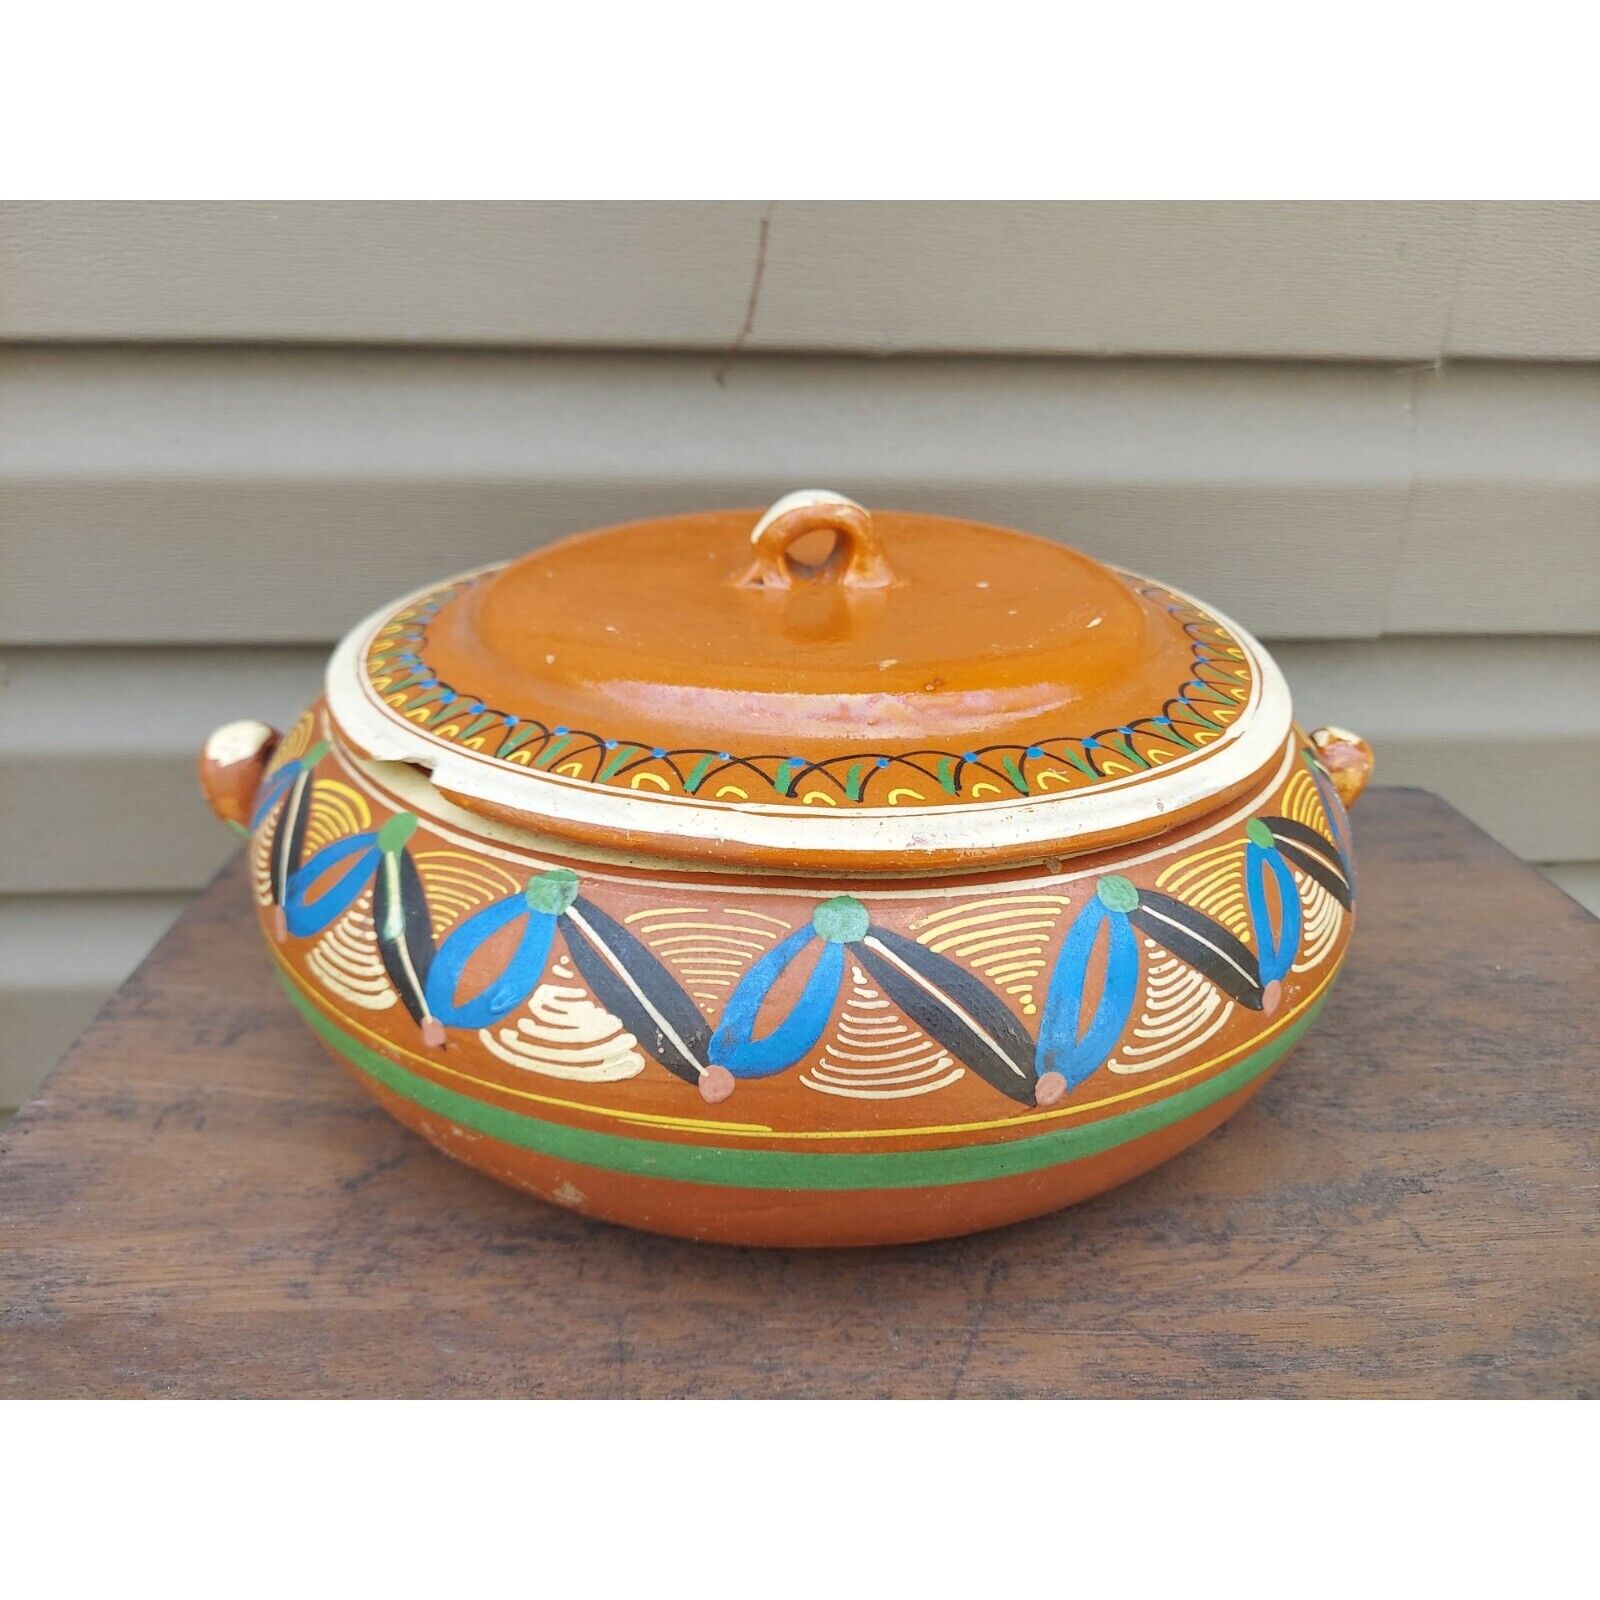 Large Vintage Tlaquepaque Mexican Pottery Covered Dish - LID AS IS -